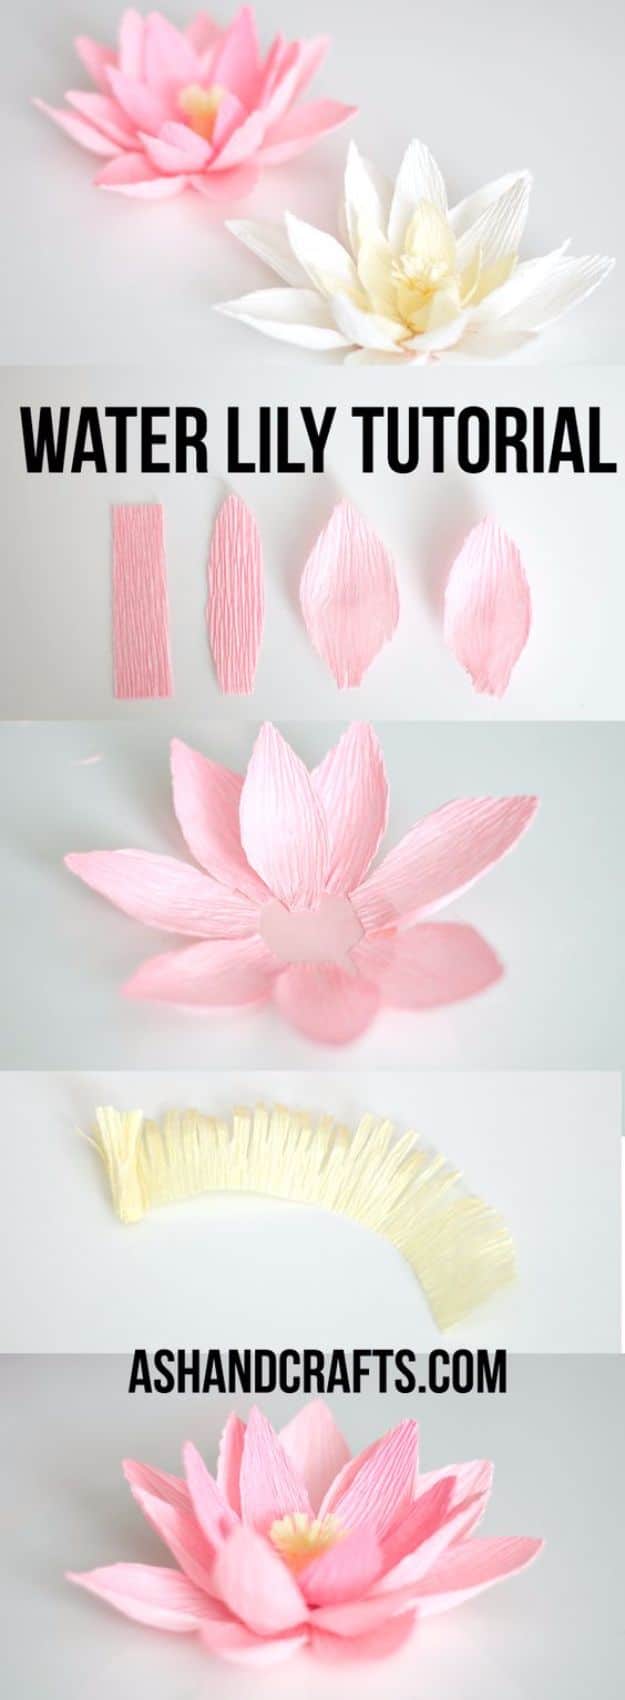 DIY Paper Flowers - Crepe Paper Water Lily - How To Make A Paper Flower - Large Wedding Backdrop for Wall Decor - Easy Tissue Paper Flower Tutorial for Kids - Giant Projects for Photo Backdrops - Daisy, Roses, Bouquets, Centerpieces - Cricut Template and Step by Step Tutorial 